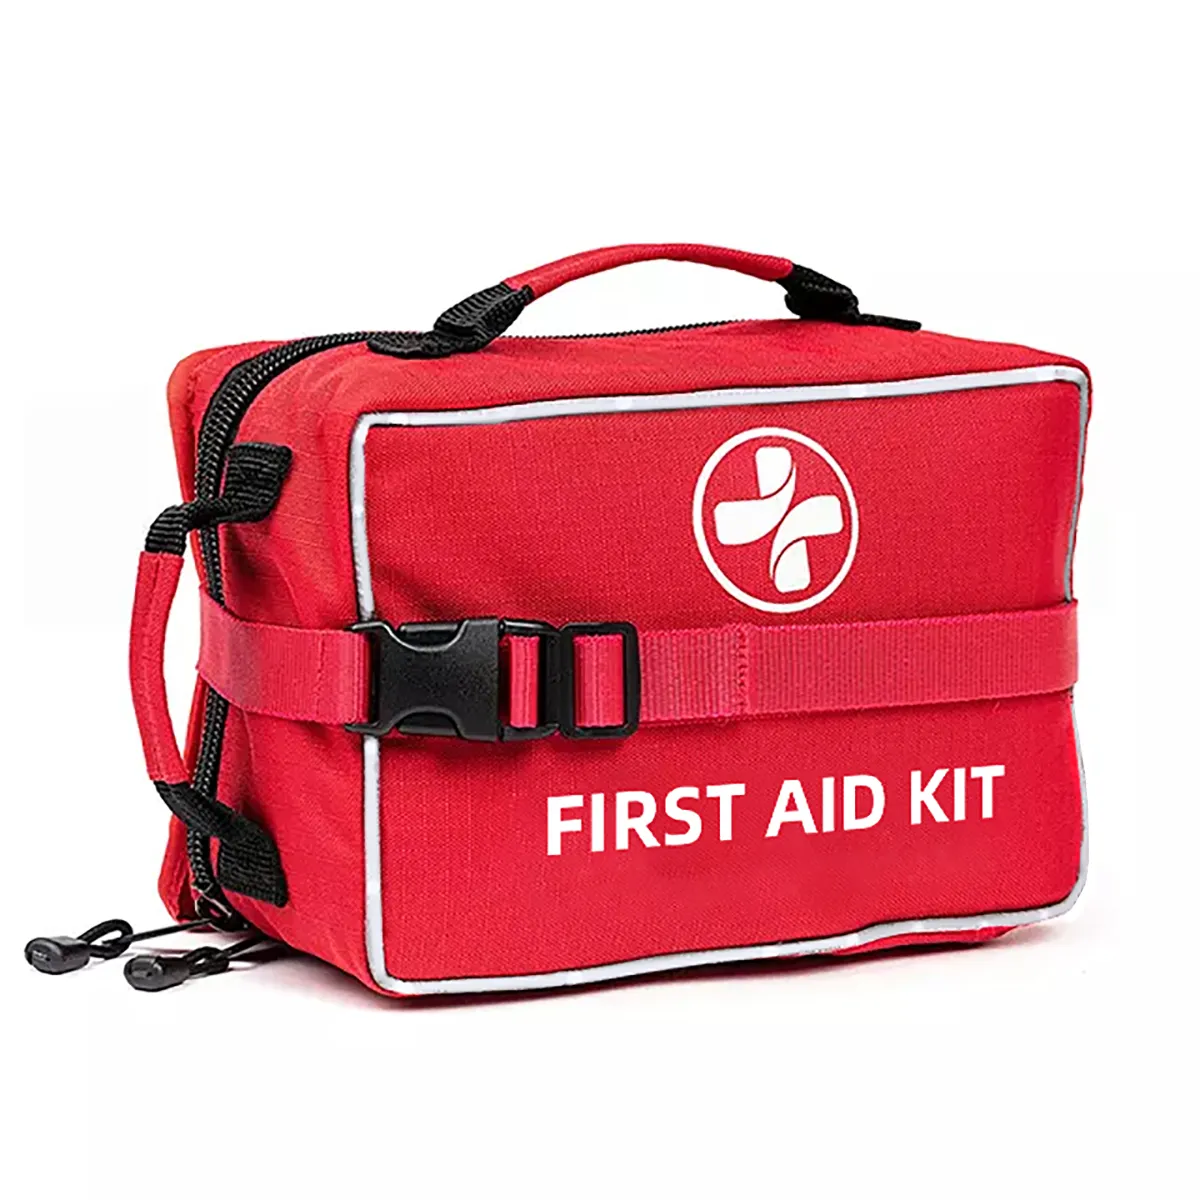 Car Medical First Aid Kits: Let safety accompany your travel